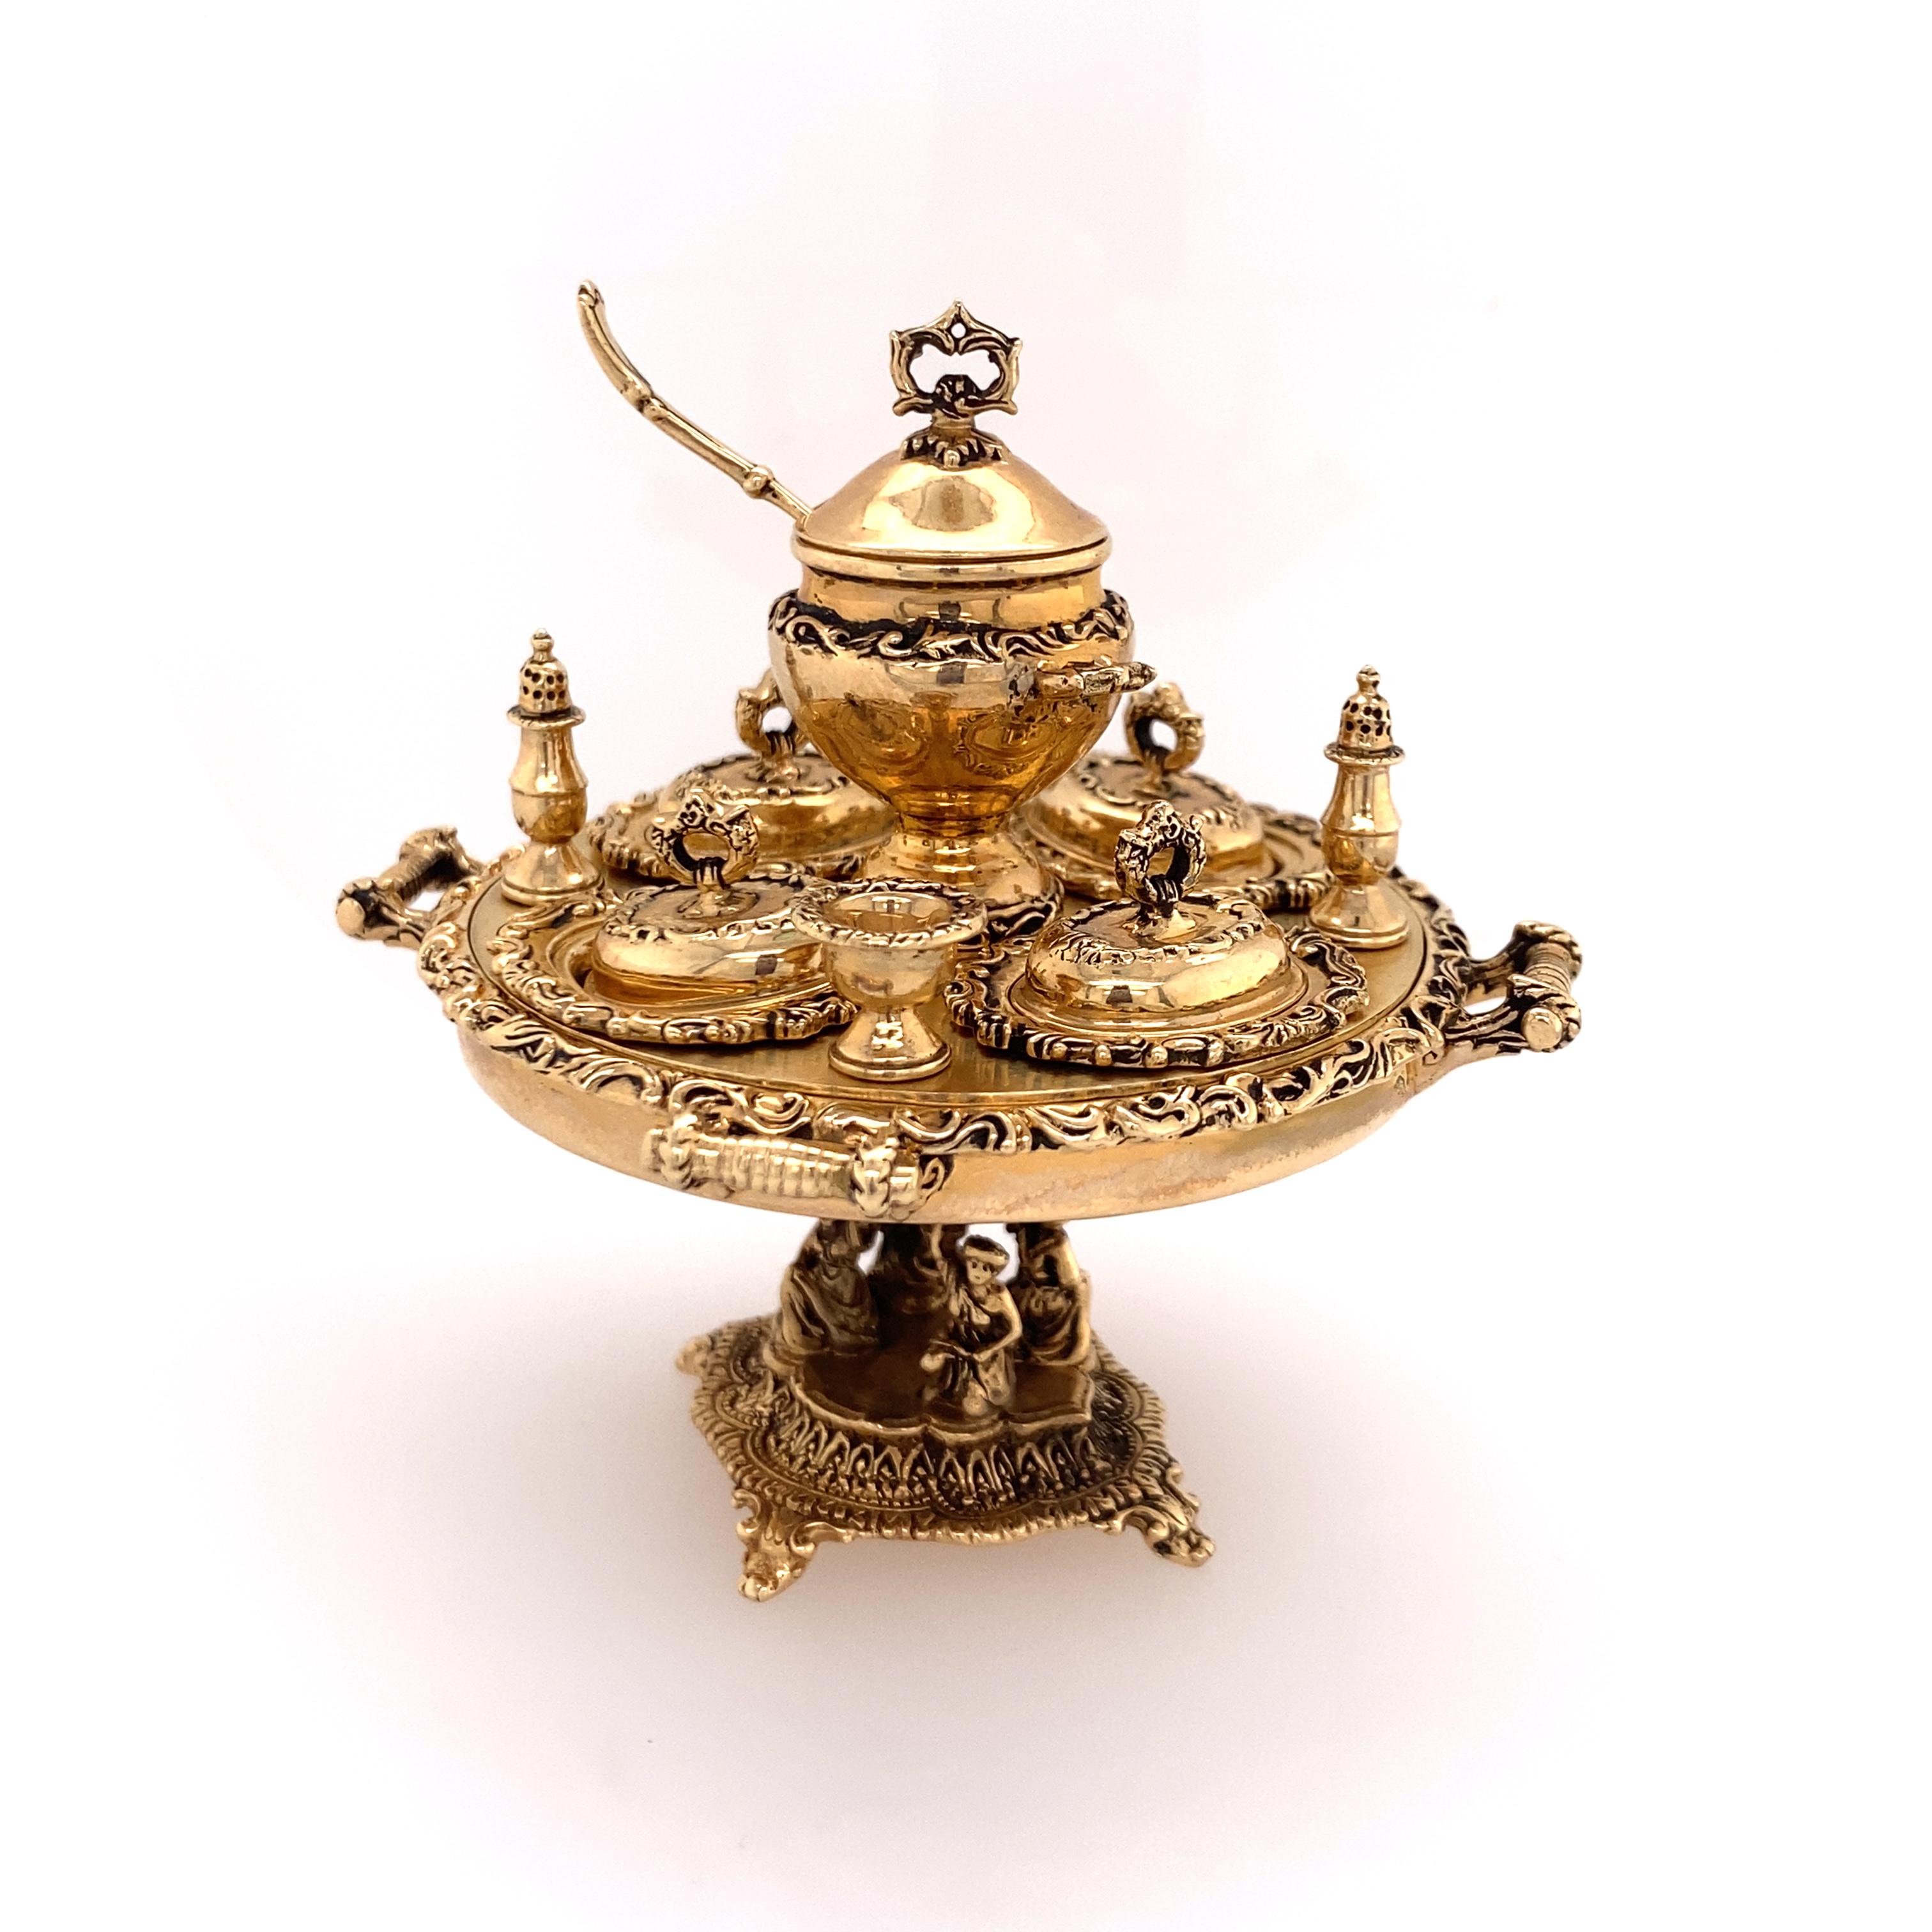 Museum quality Stephen van O'Meara 13 piece miniature English hunt breakfast set, consisting of 14K yellow gold round lazy susan with 4 handles and small pedestal base, 4 removable covered dishes, center lidded tureen and ladle, and 2 chalices and